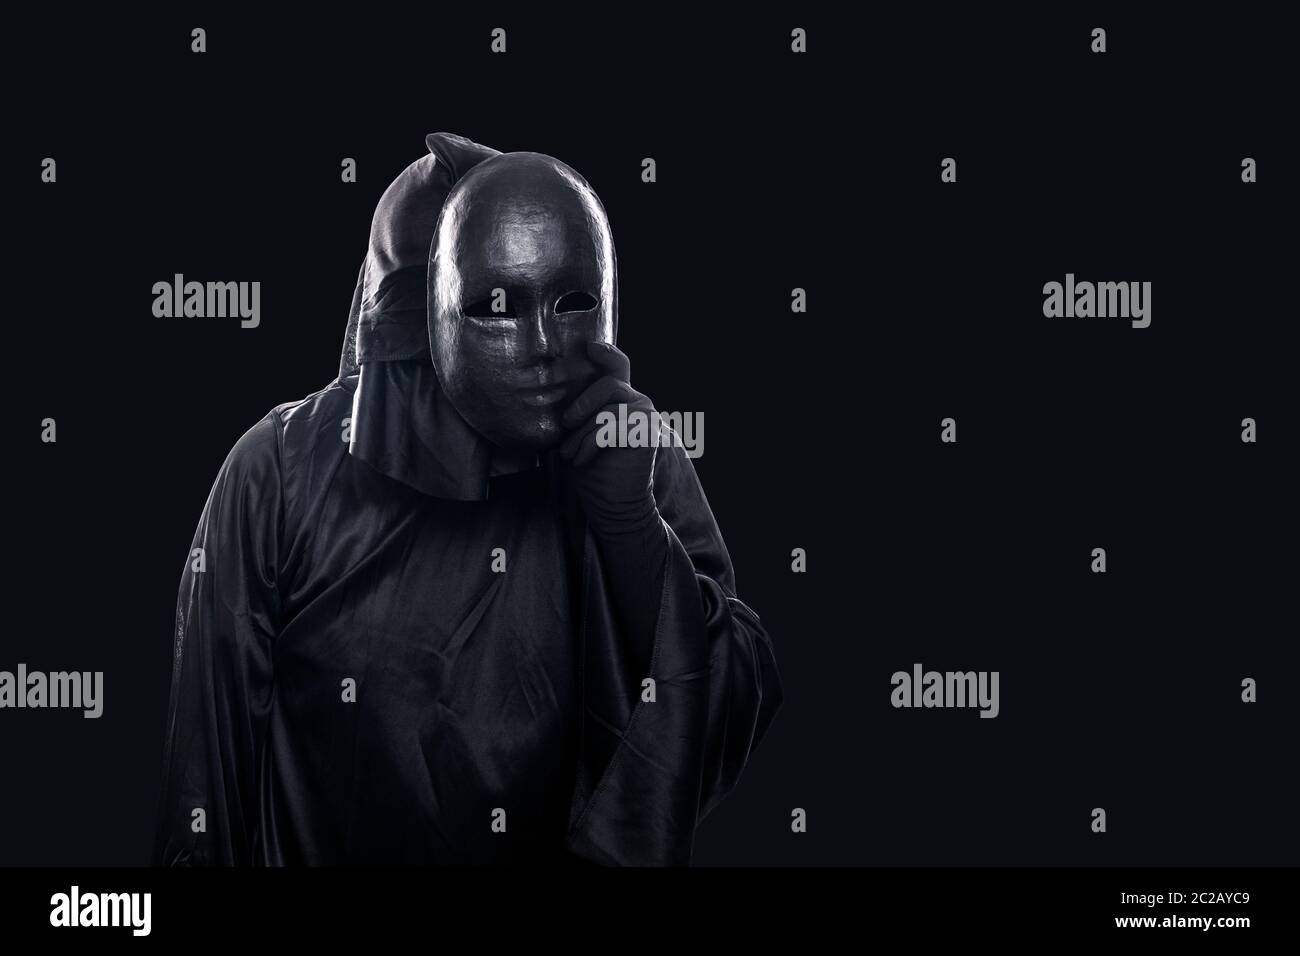 Scary figure in hooded cloak with mask in hand isolated on black background Stock Photo